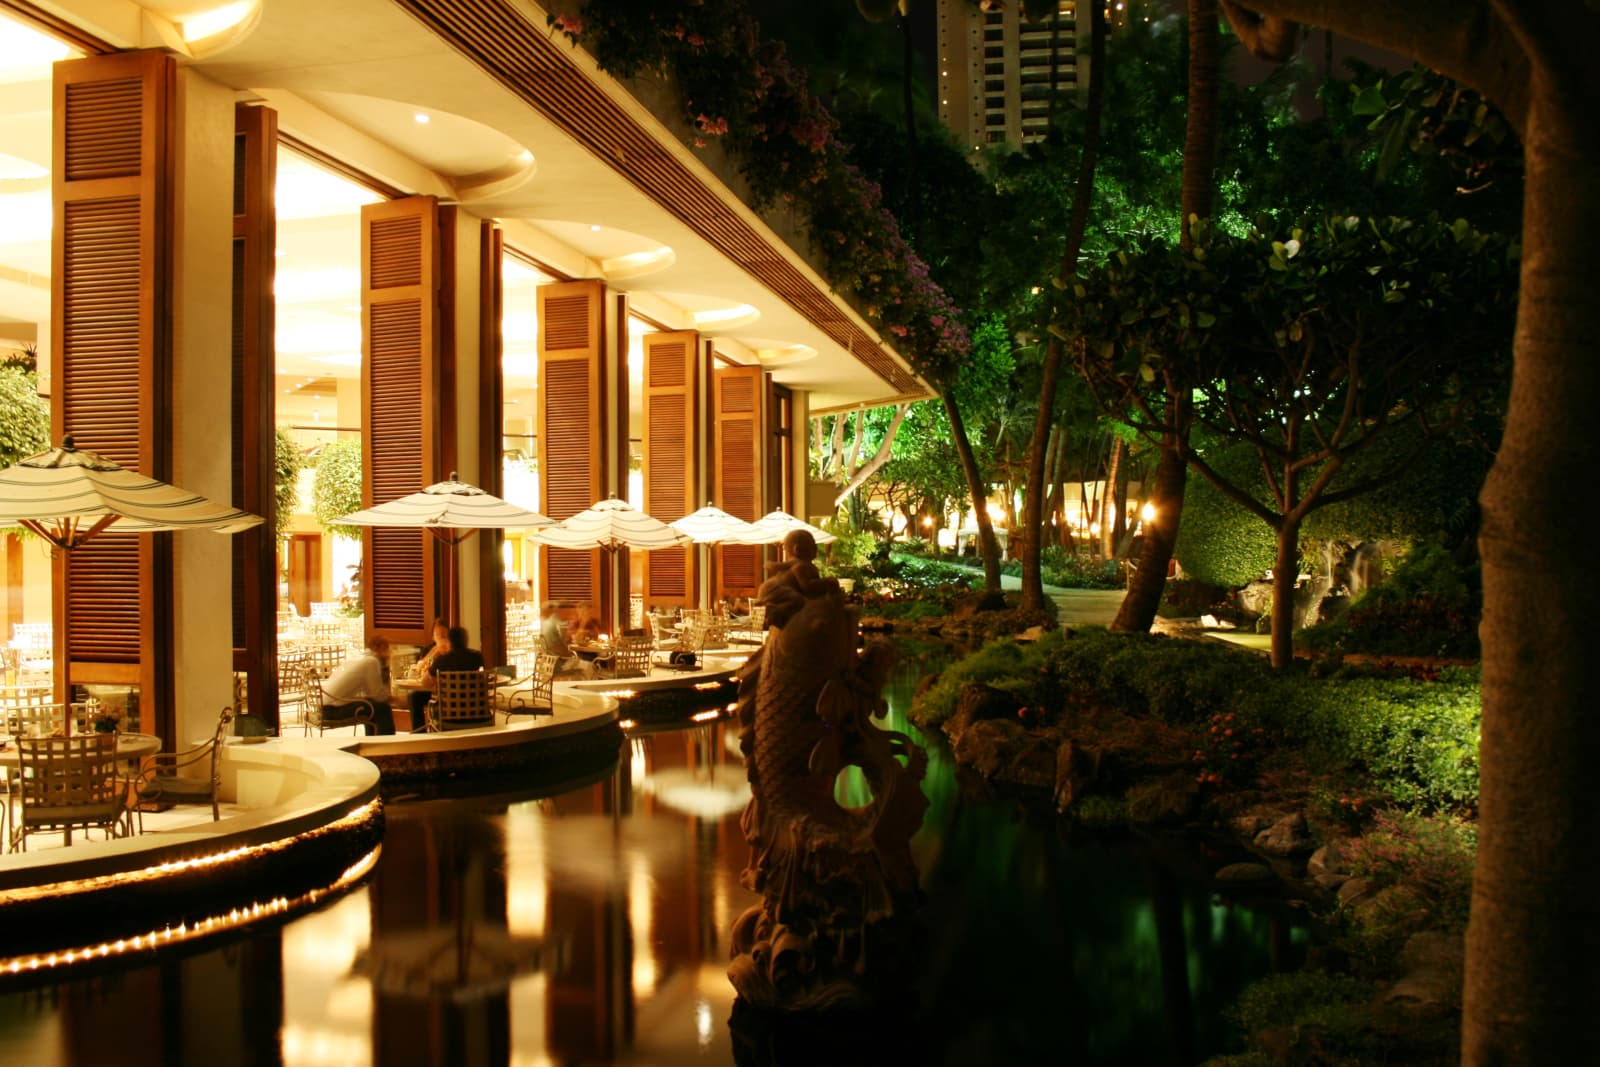 Picture from a Waikiki Resort with outdoor seating and greenery